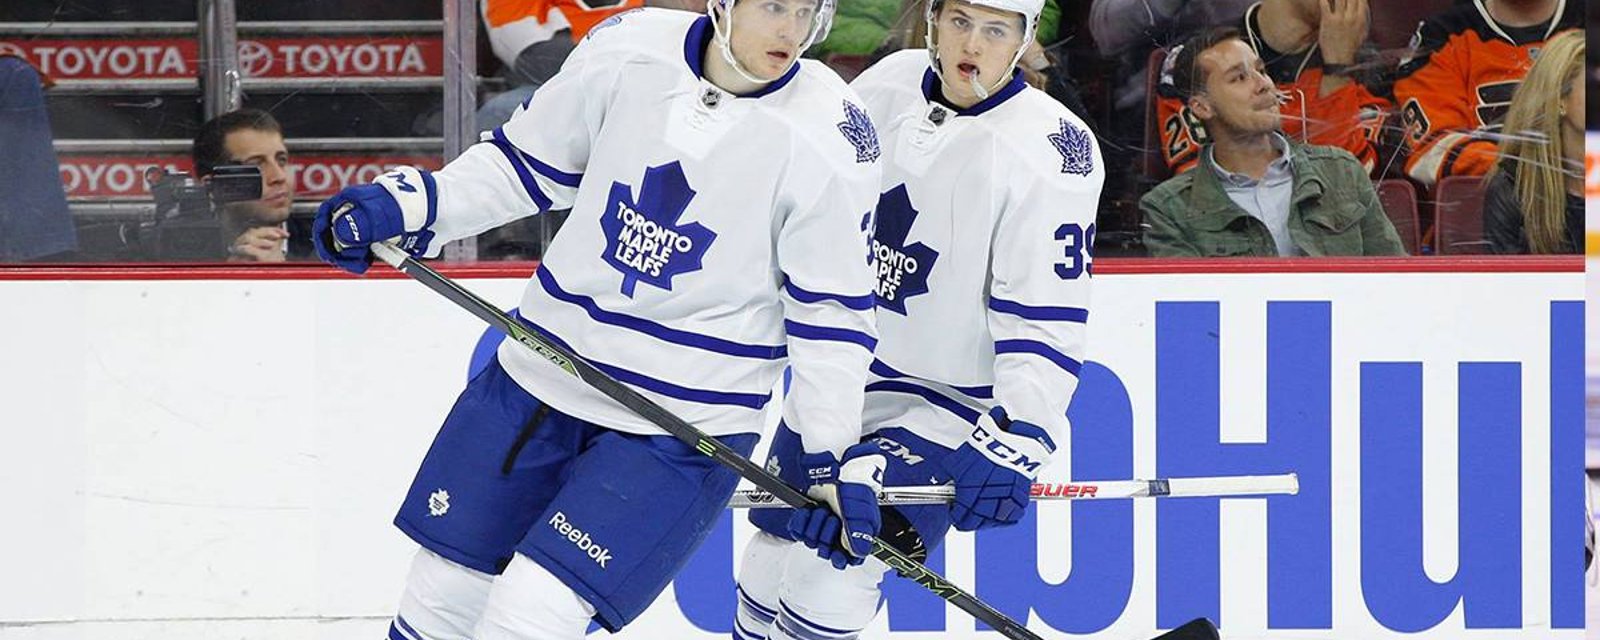 Report: Leafs place 6 players on waivers, including offensive former first round pick